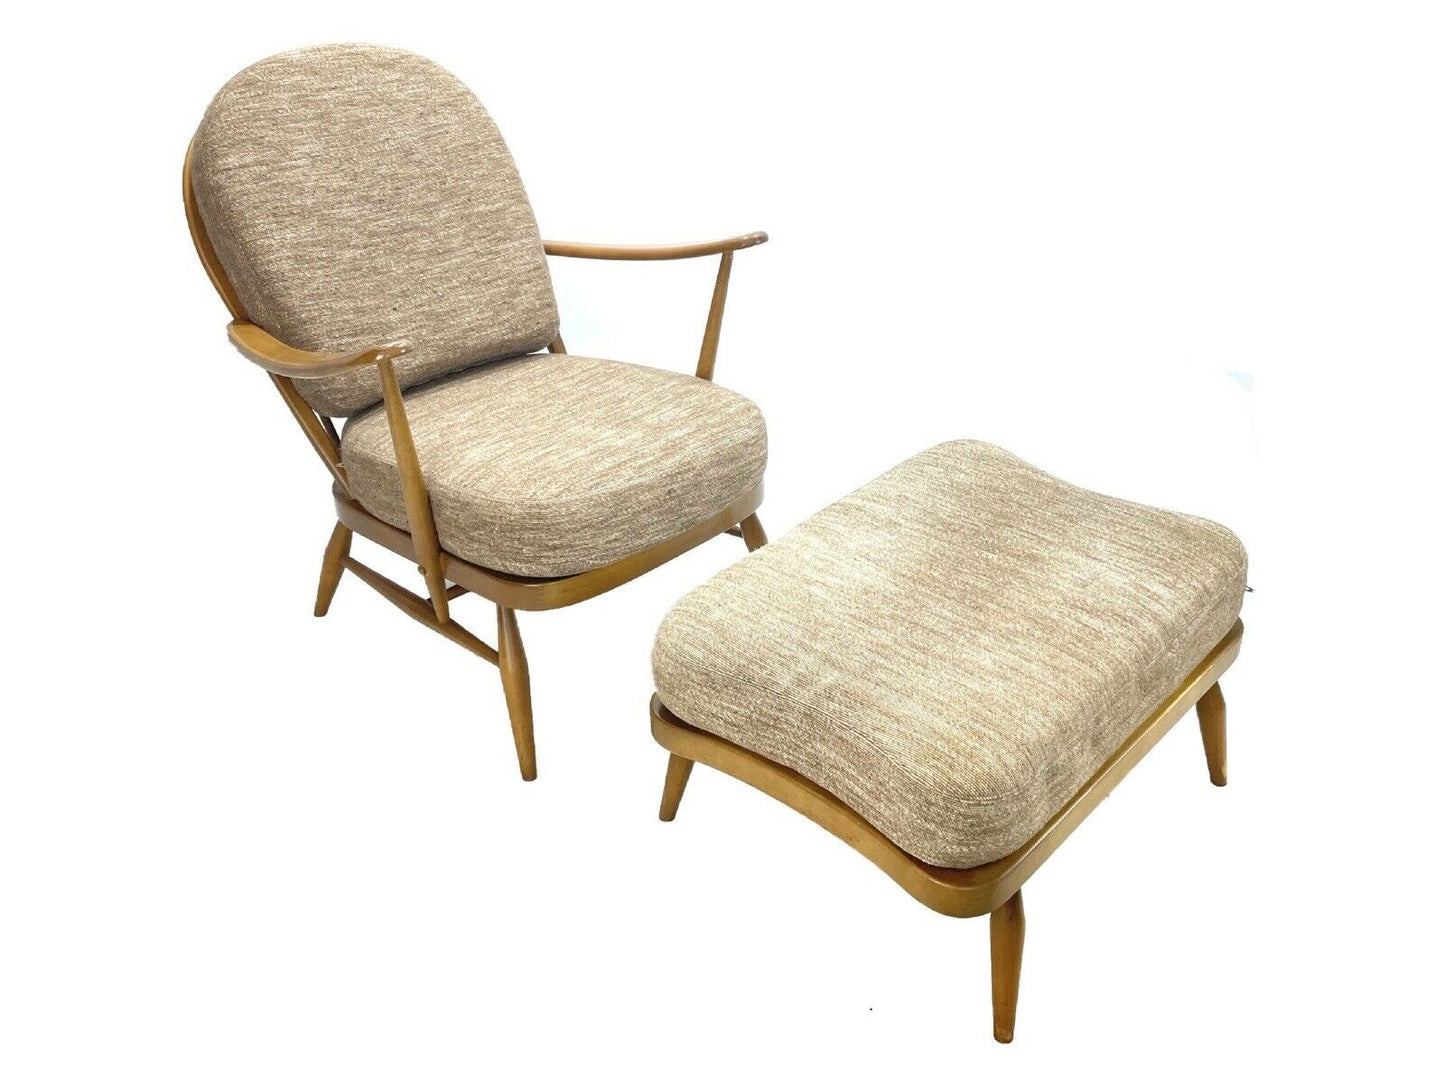 Ercol Armchair No. 203 and Matching Foot Stool No. 341 WITH Beige Cushions